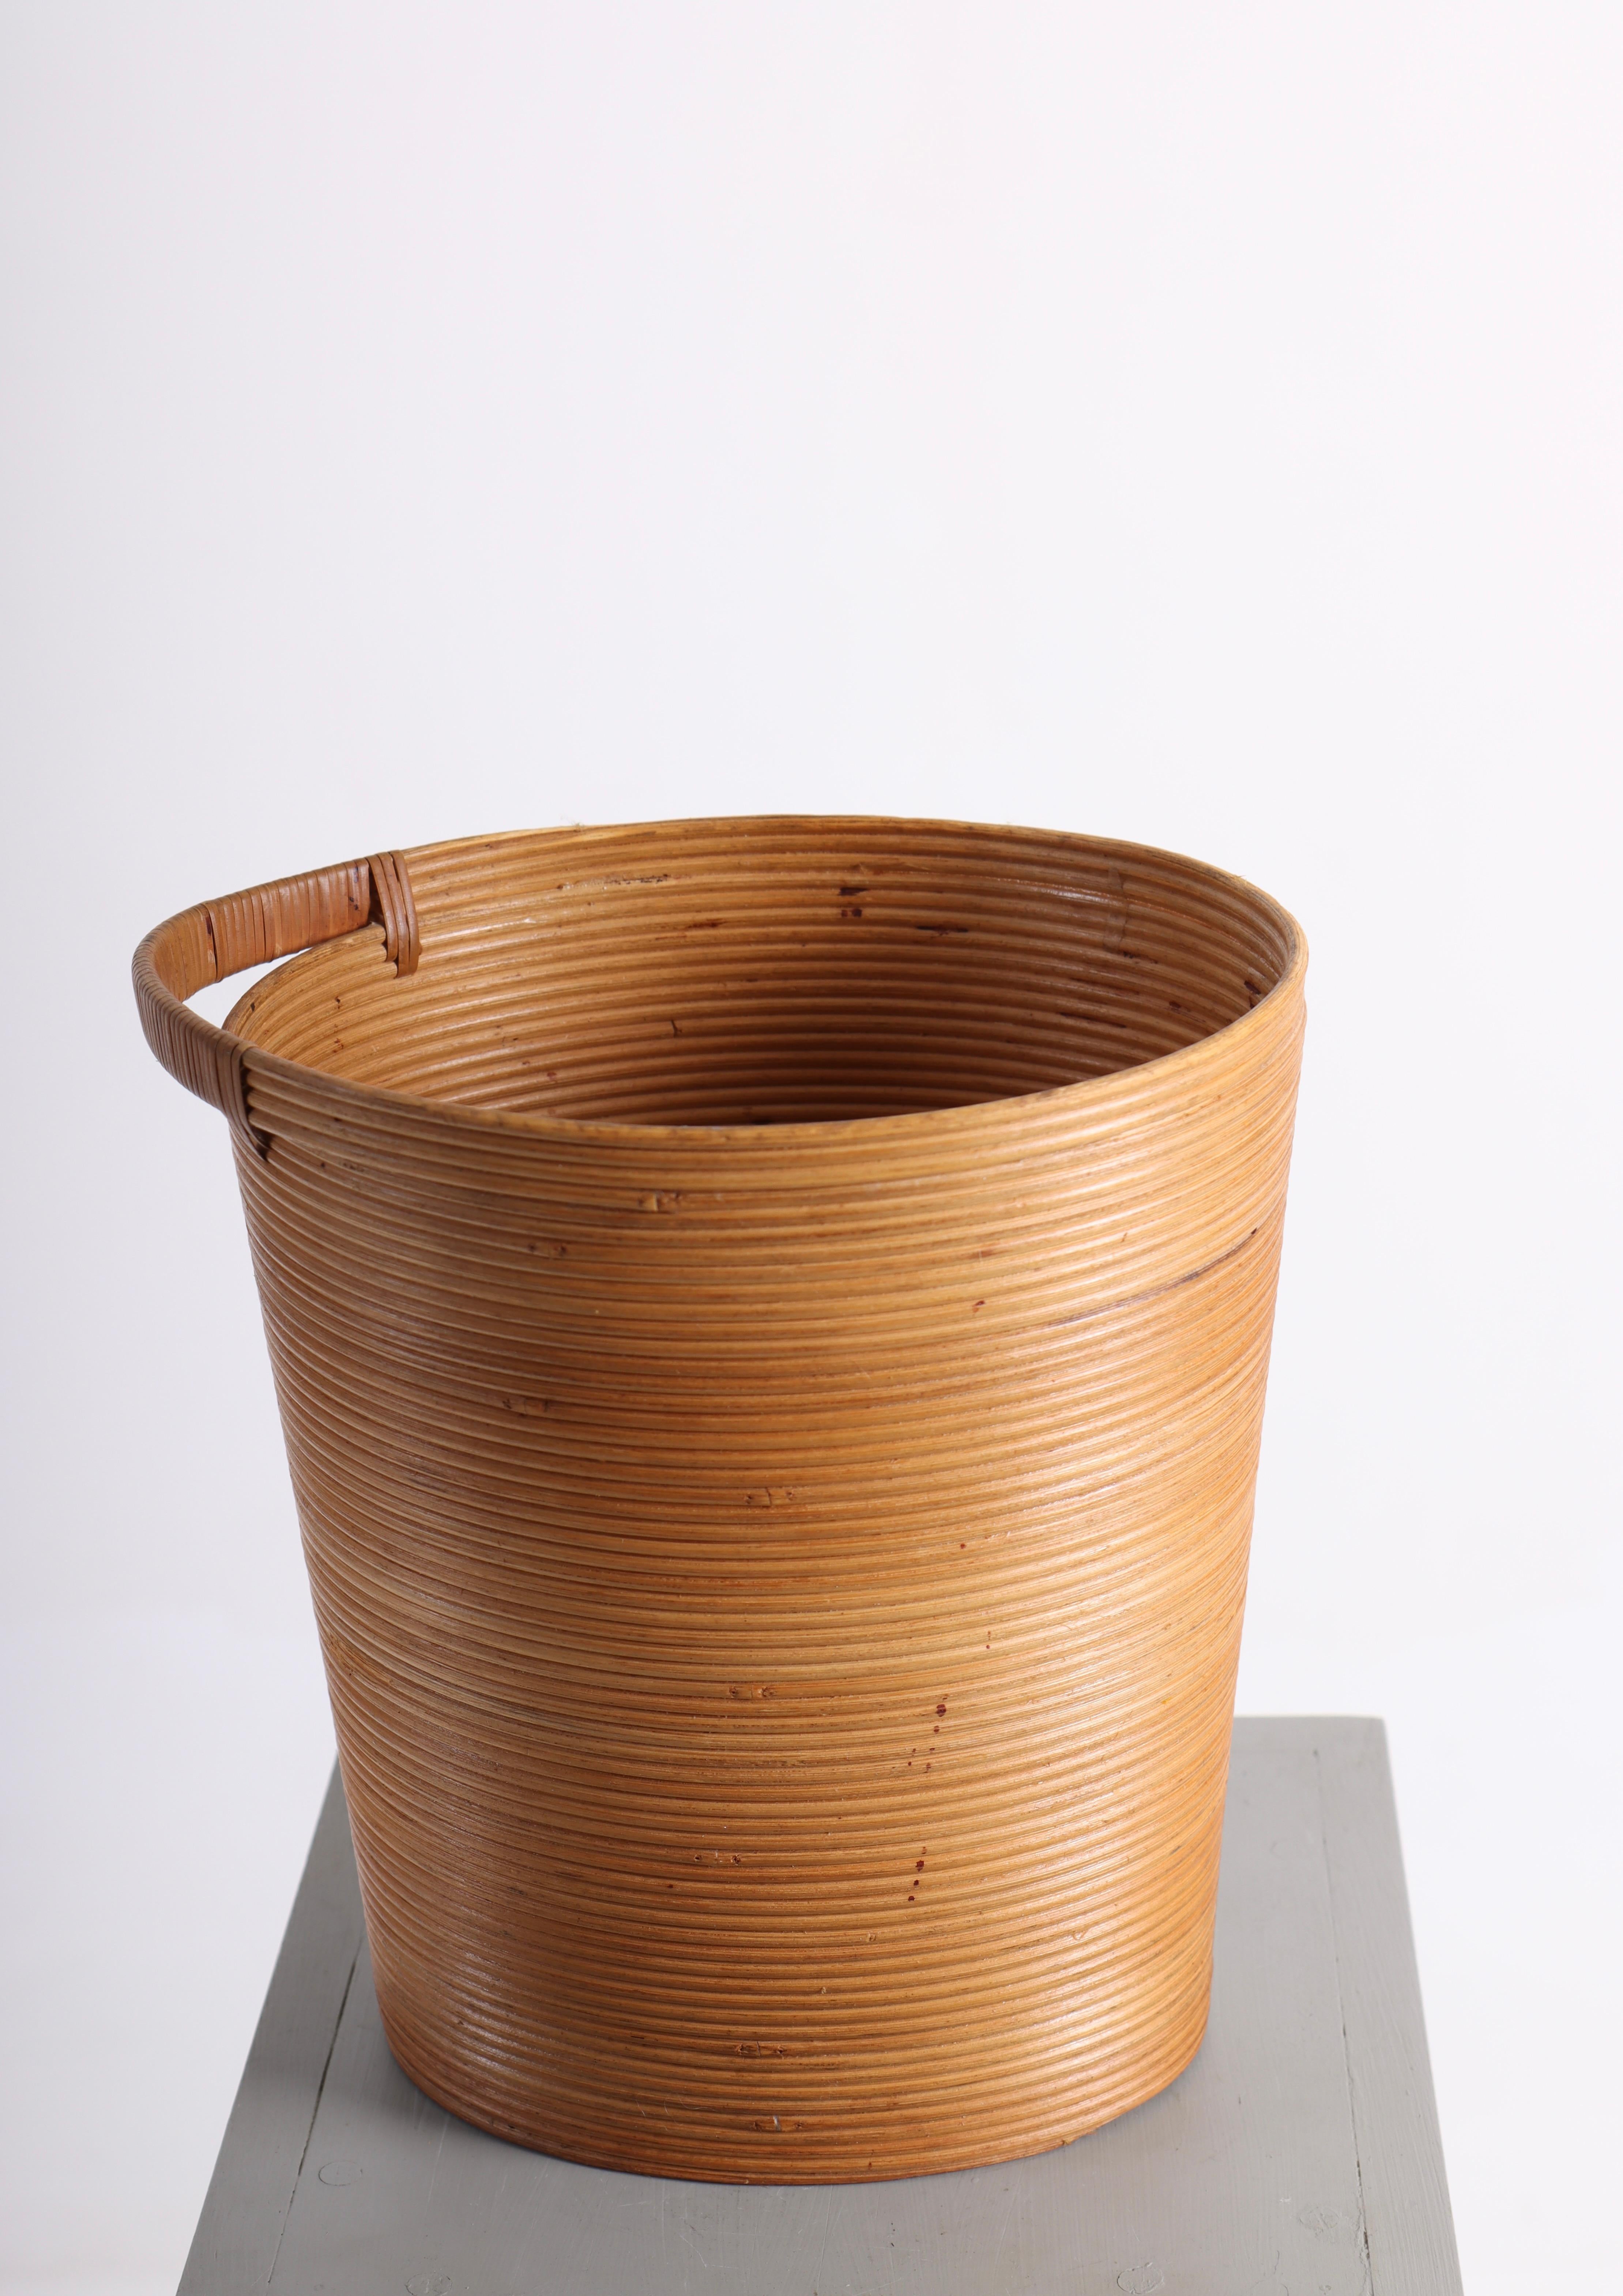 Waste bin in cane, designed and made by Lauritz Lønborg. Great original condition.